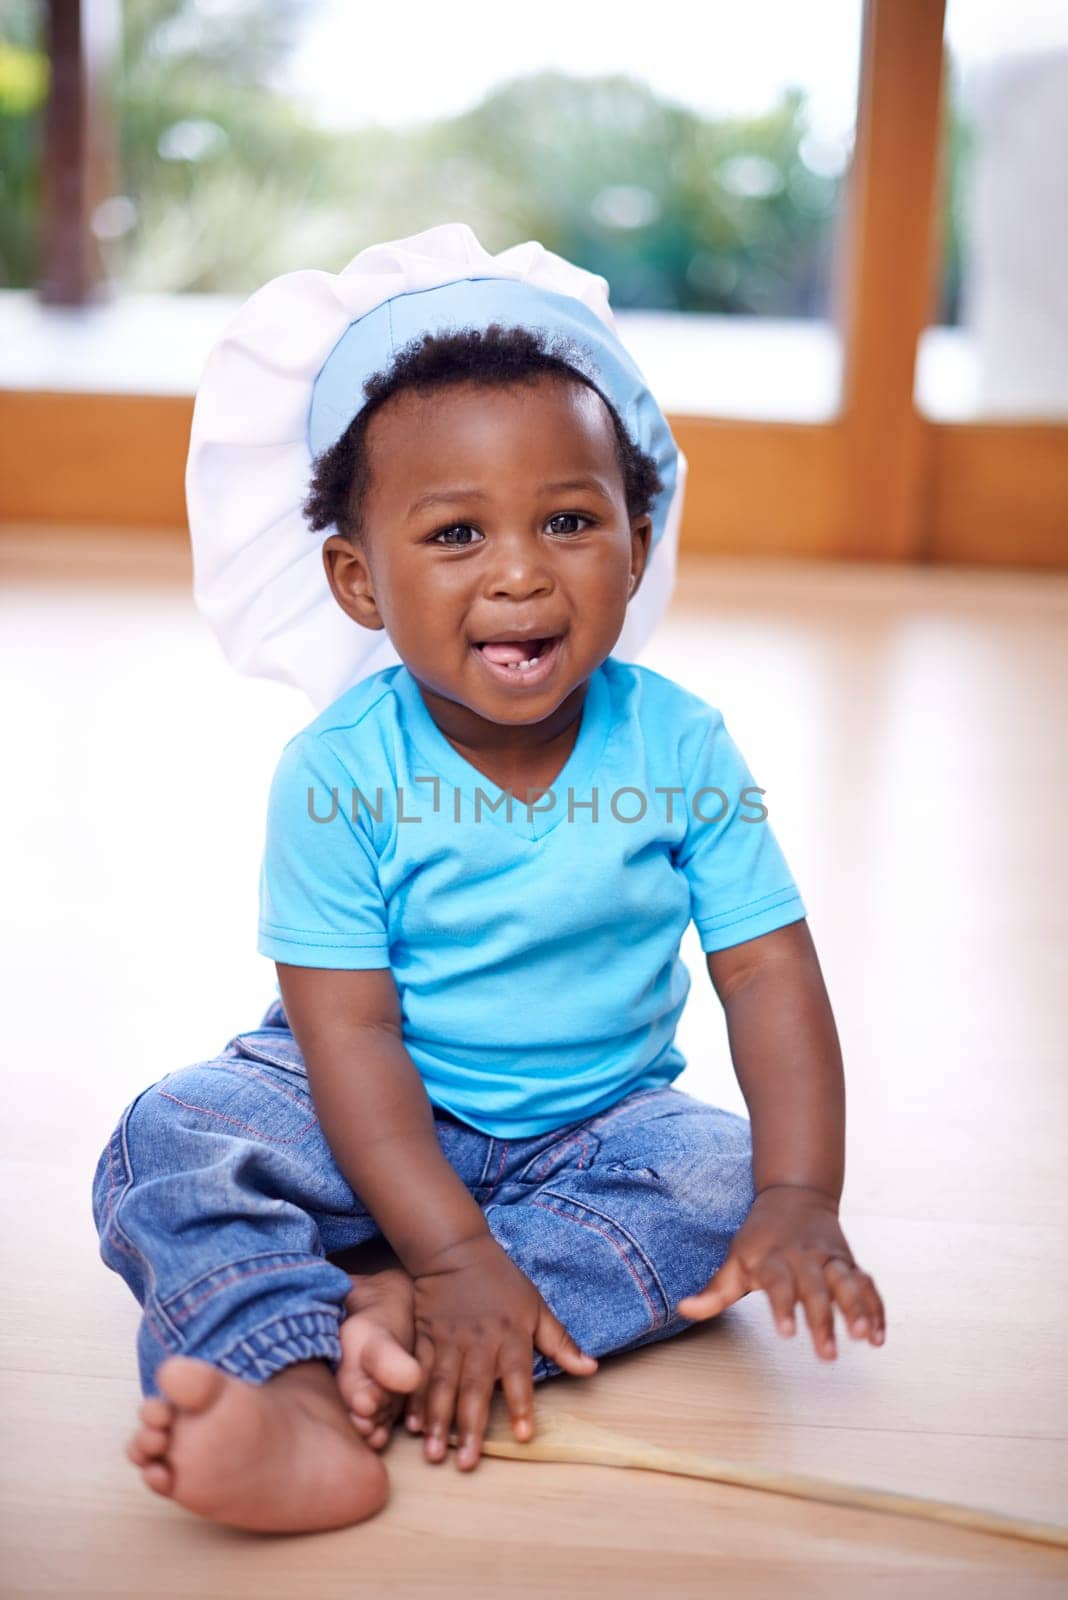 Black baby, portrait and chefs hat in house on floor for kids youth, playing and fun. African child, happy and smile in home in living room with toque for recreation, memories and family bonding.